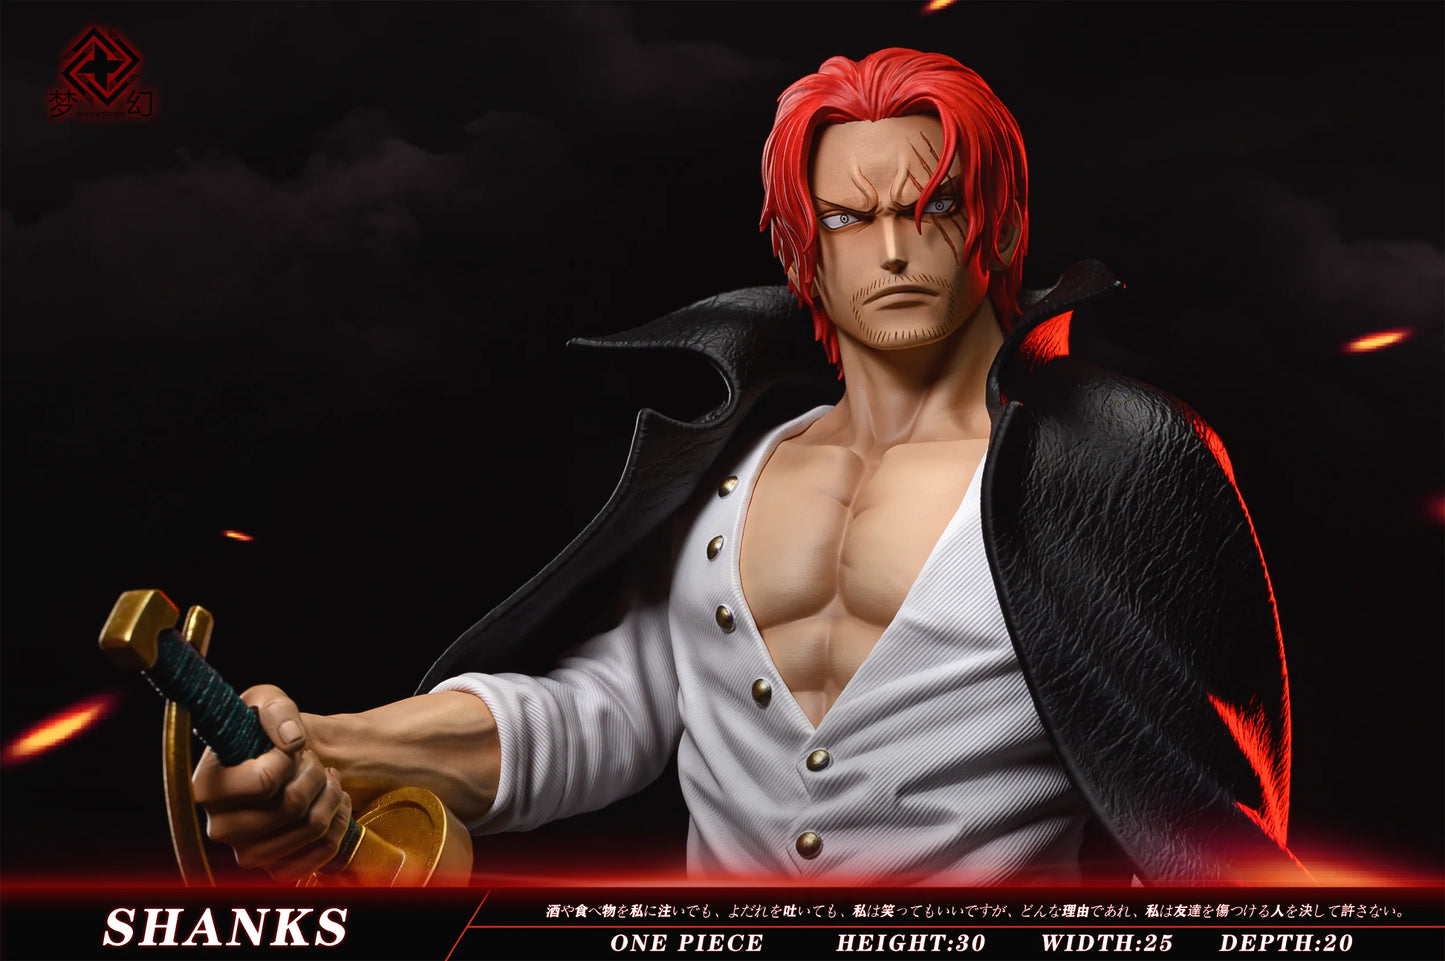 One Piece - Red hair Shanks by Dream Studio